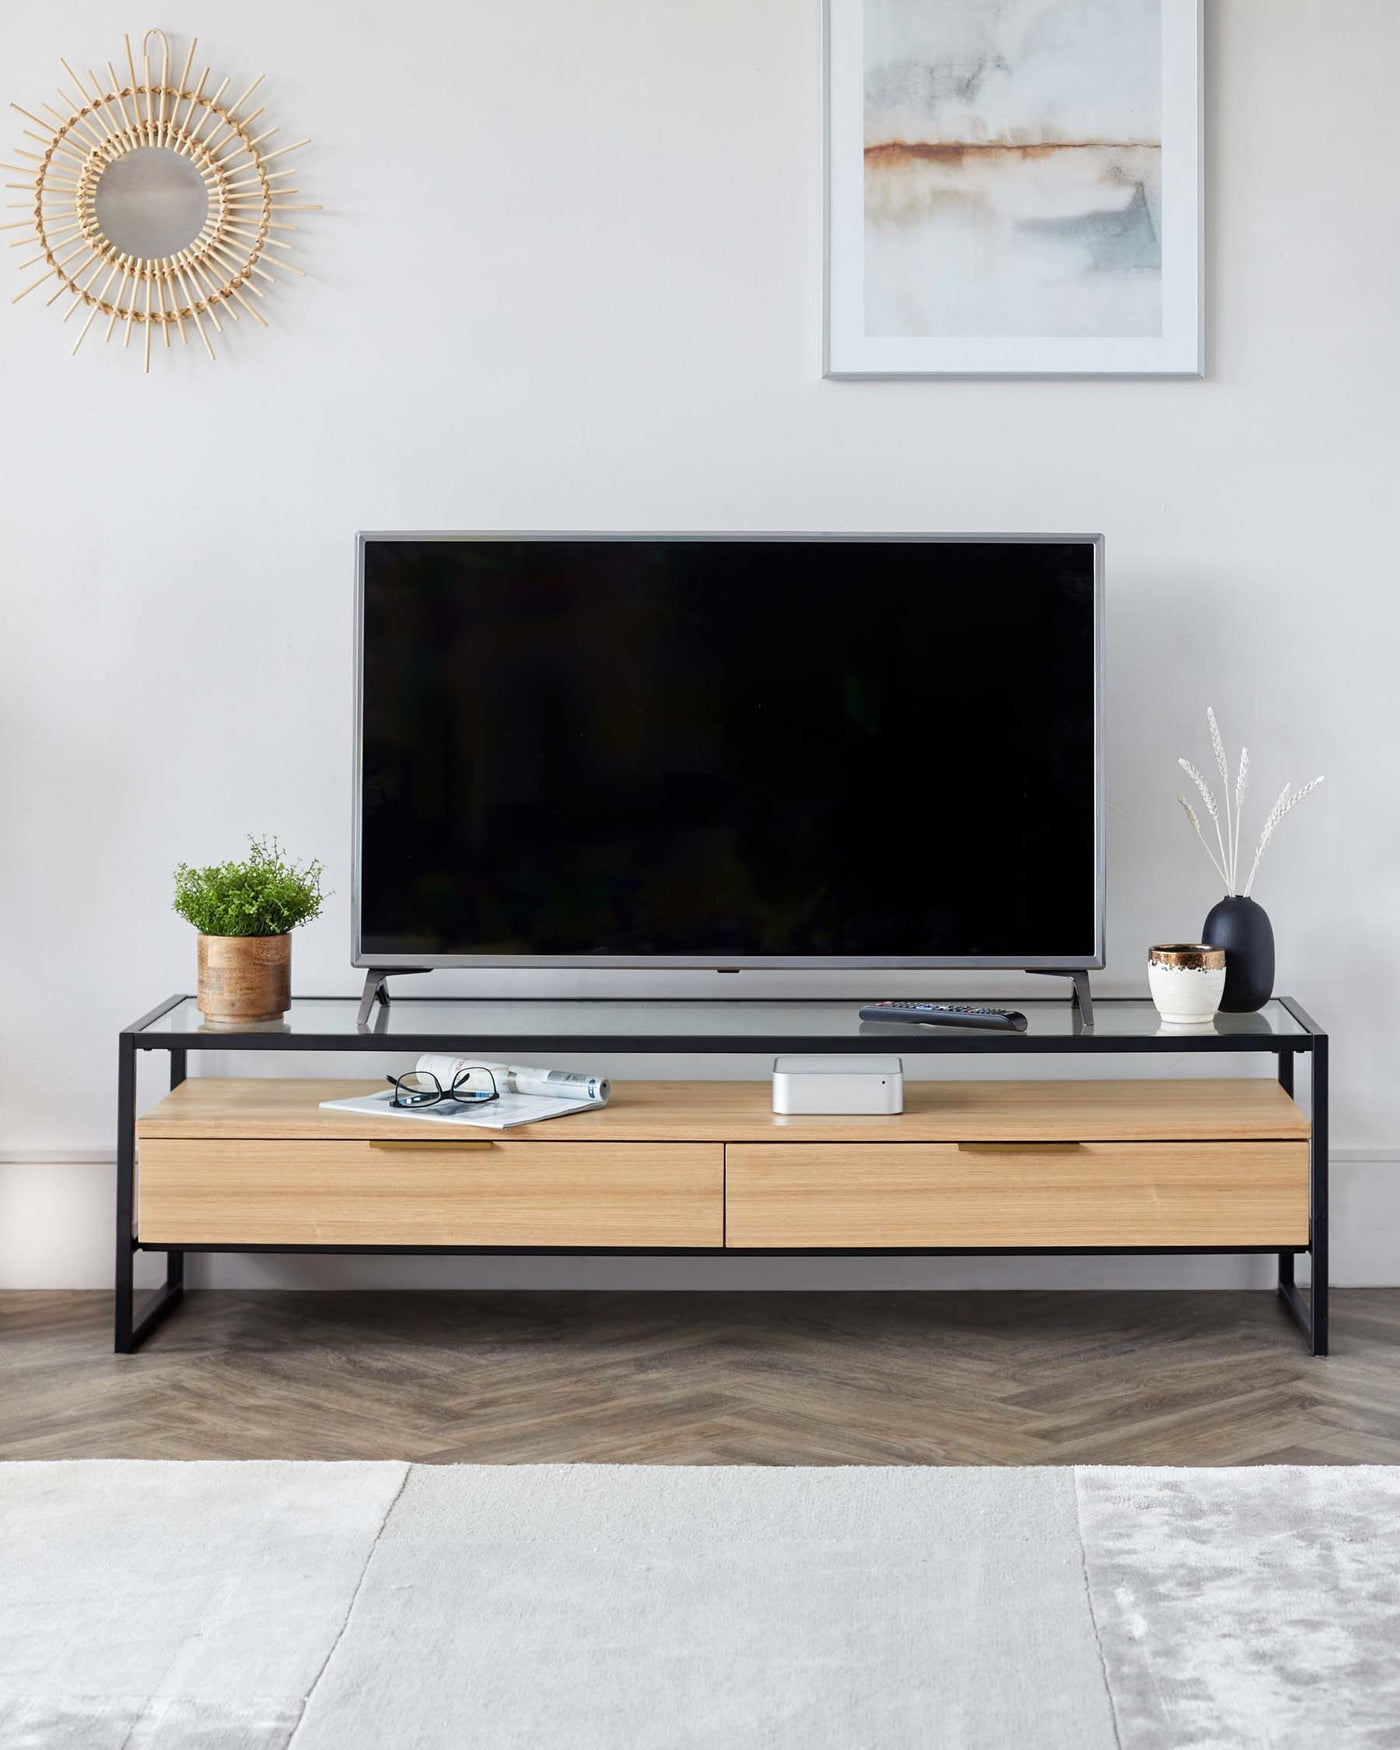 Modern minimalist TV stand in light oak finish with two drawers and one open shelf, featuring a black metal frame, situated on a light wood floor with a partial grey area rug below.